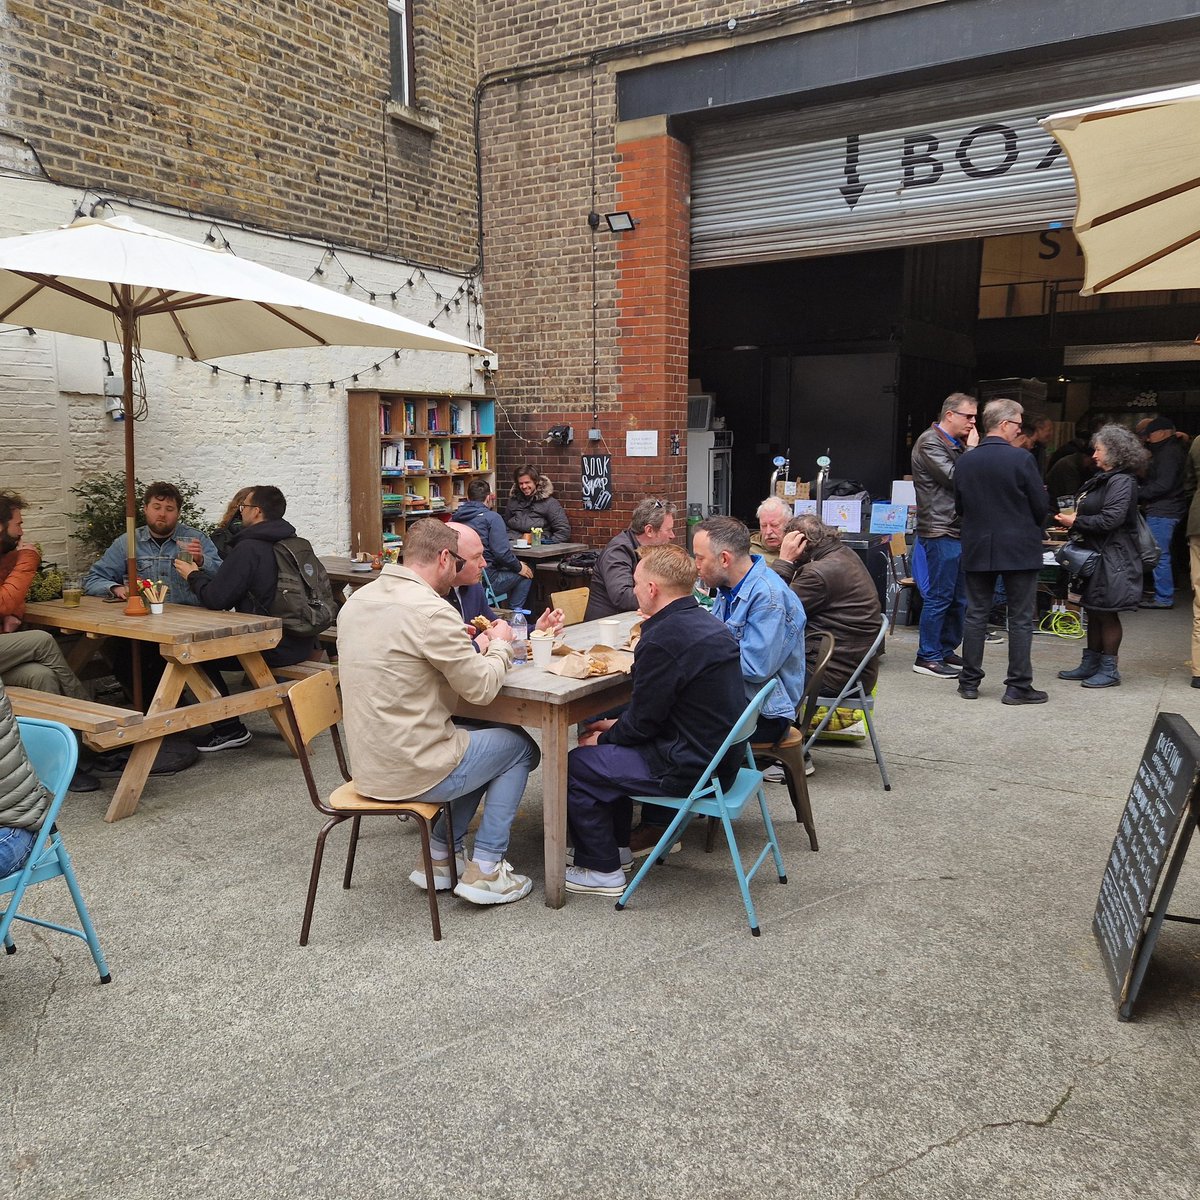 The cider is flowing, the food is flying out and the joint is jumping here at Rocketvan Studio today. Come down and join us!